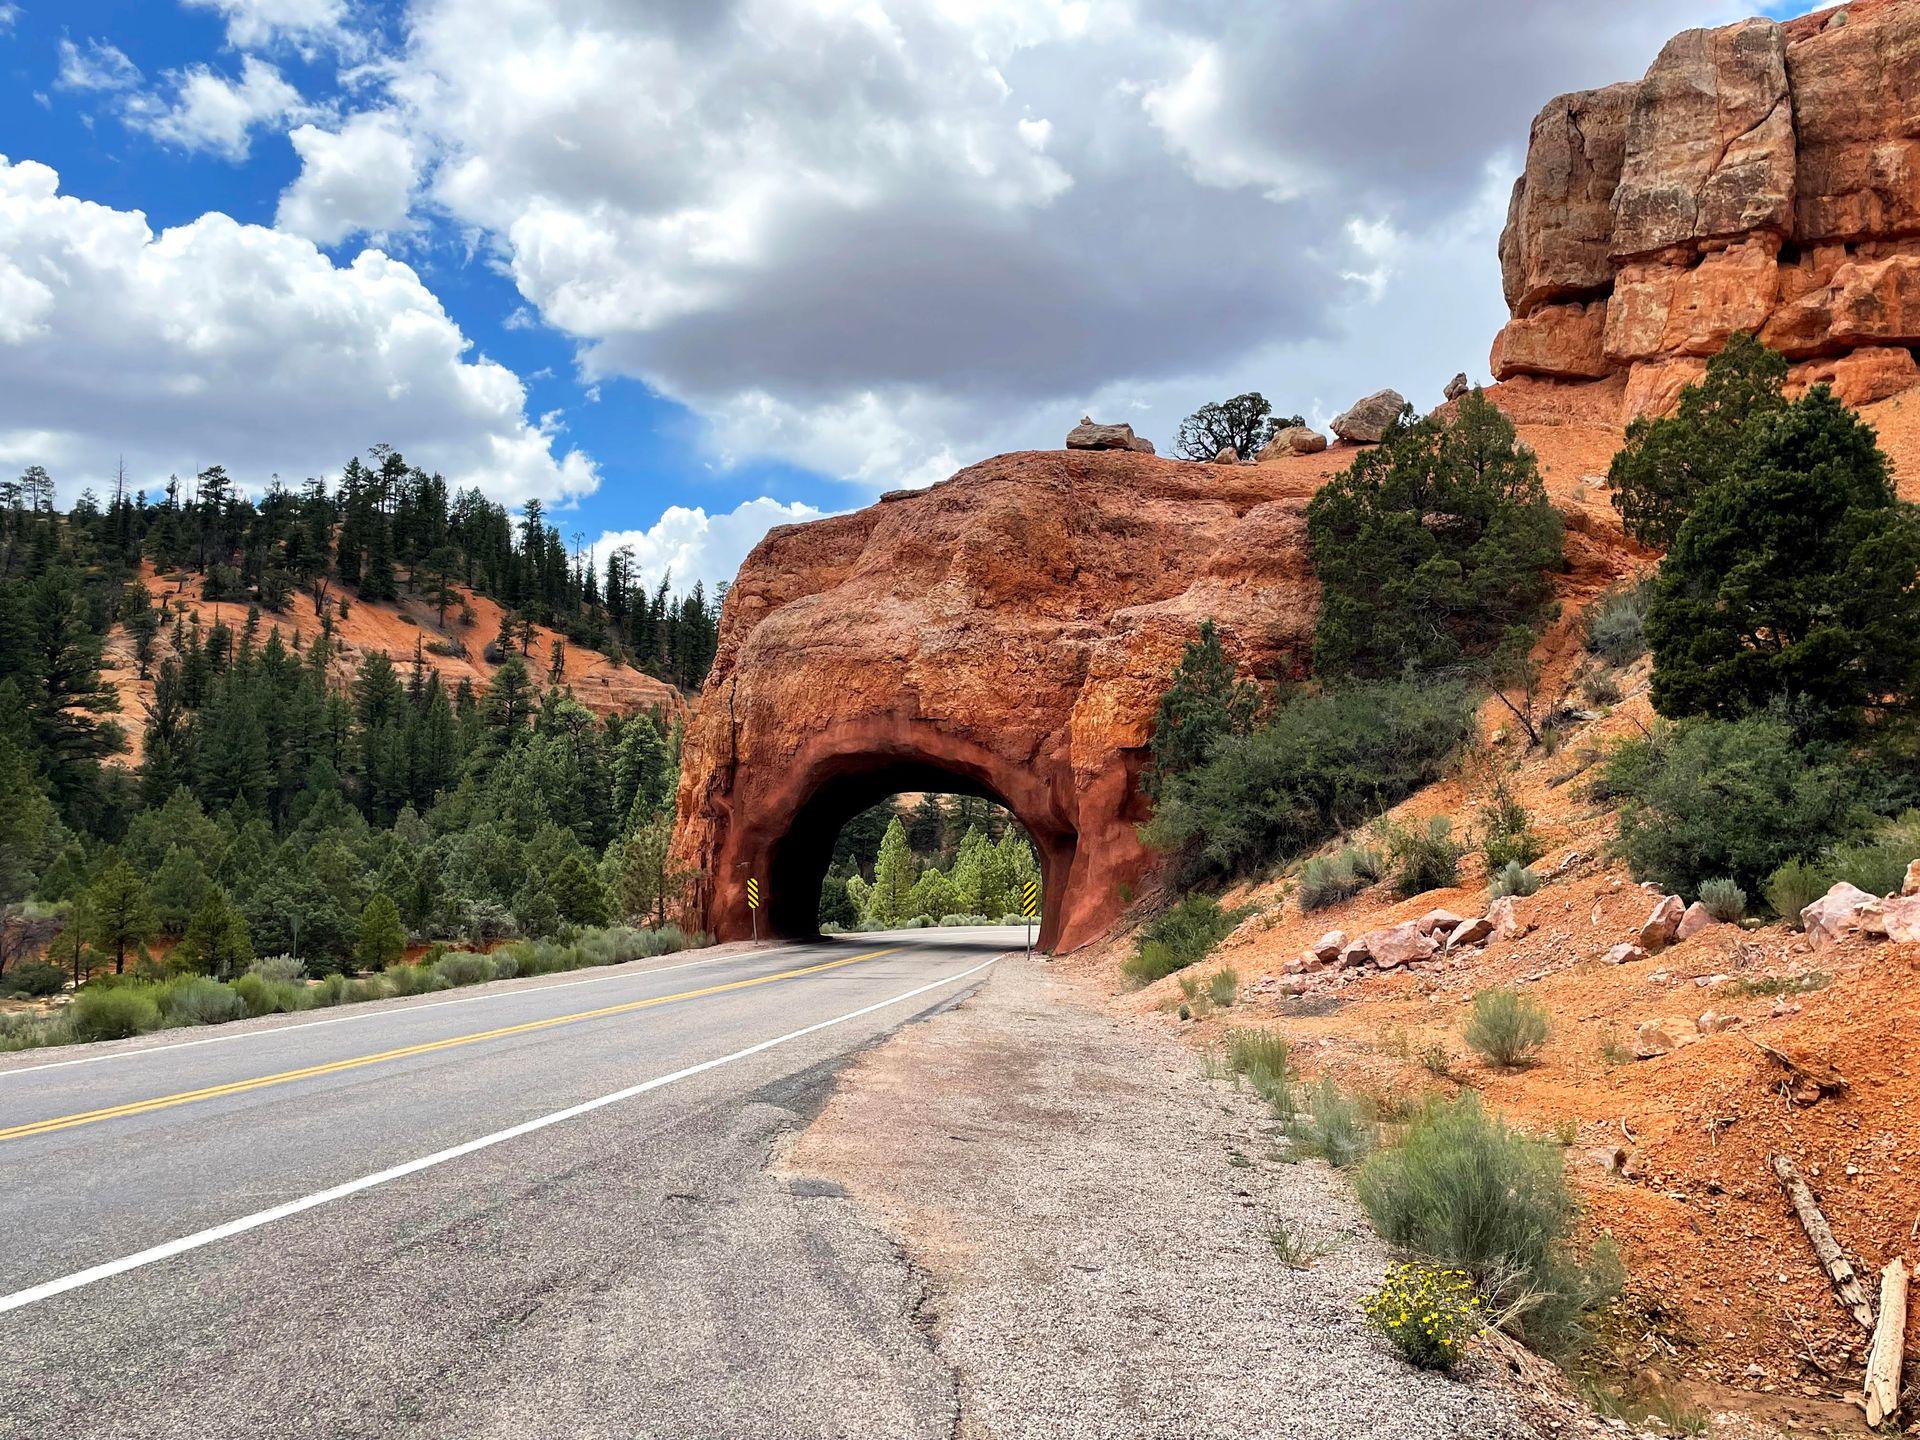 A orange rock tunnel that cars can drive through at Red Canyon.